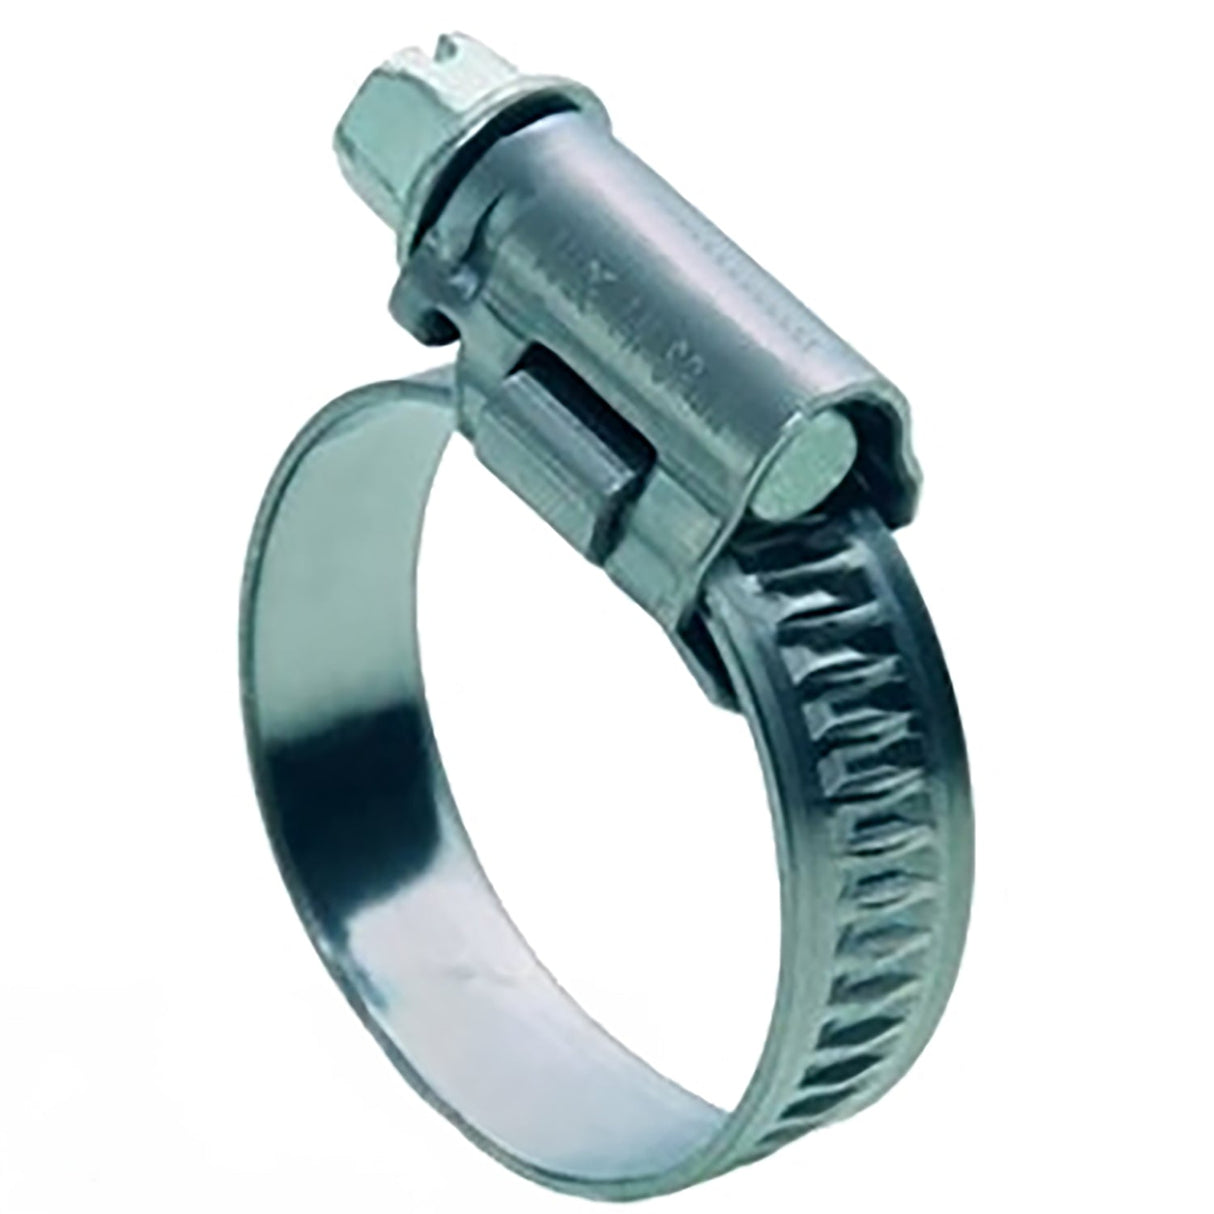 Hose Clamp Stainless Steel 12-22